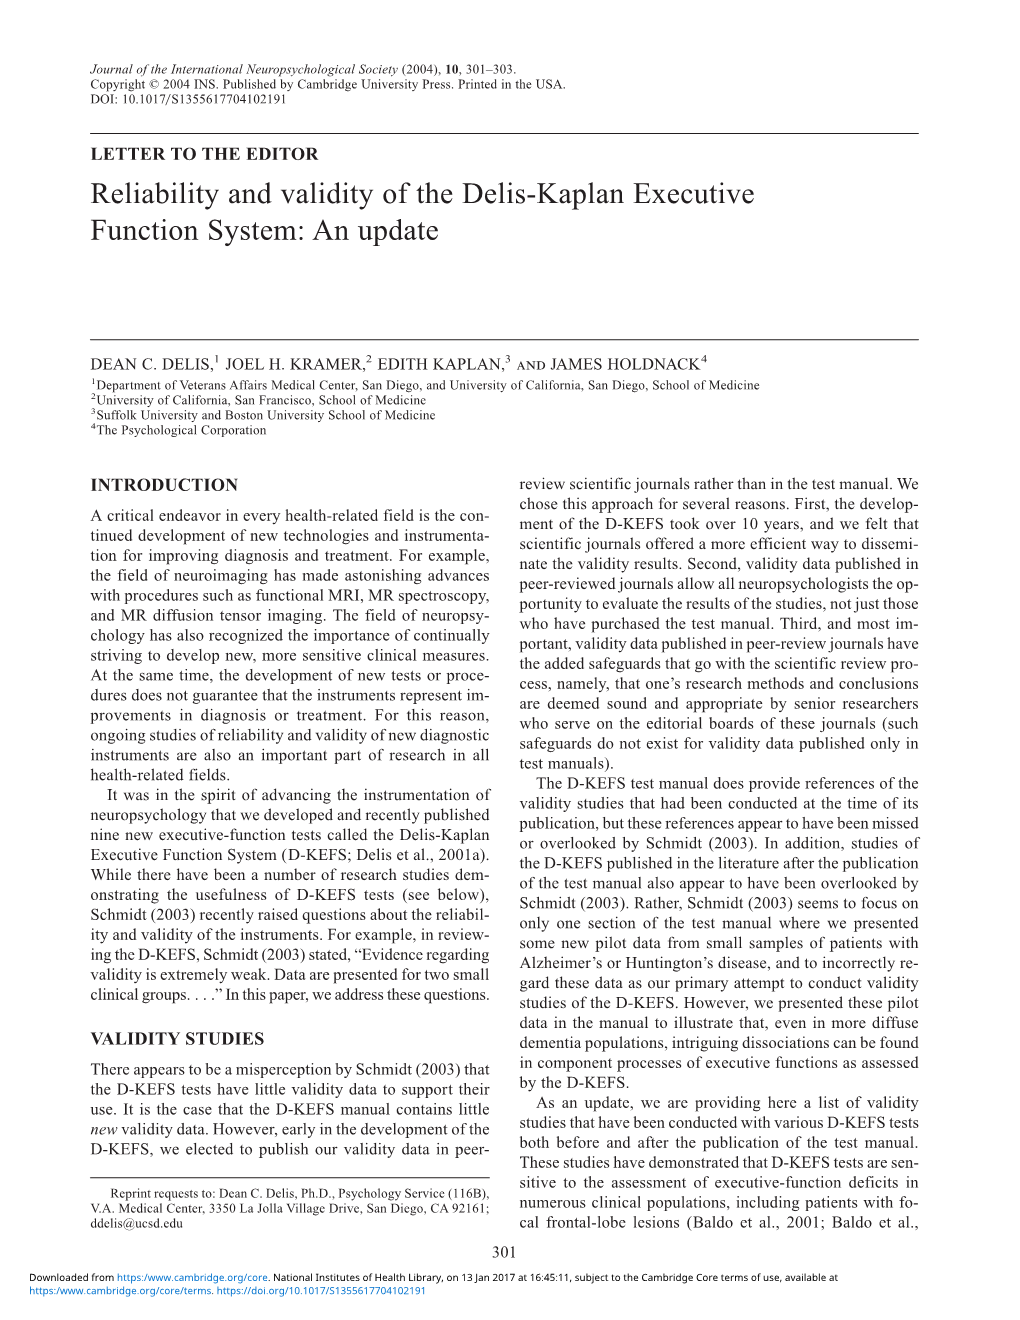 Reliability and Validity of the Delis-Kaplan Executive Function System: an Update